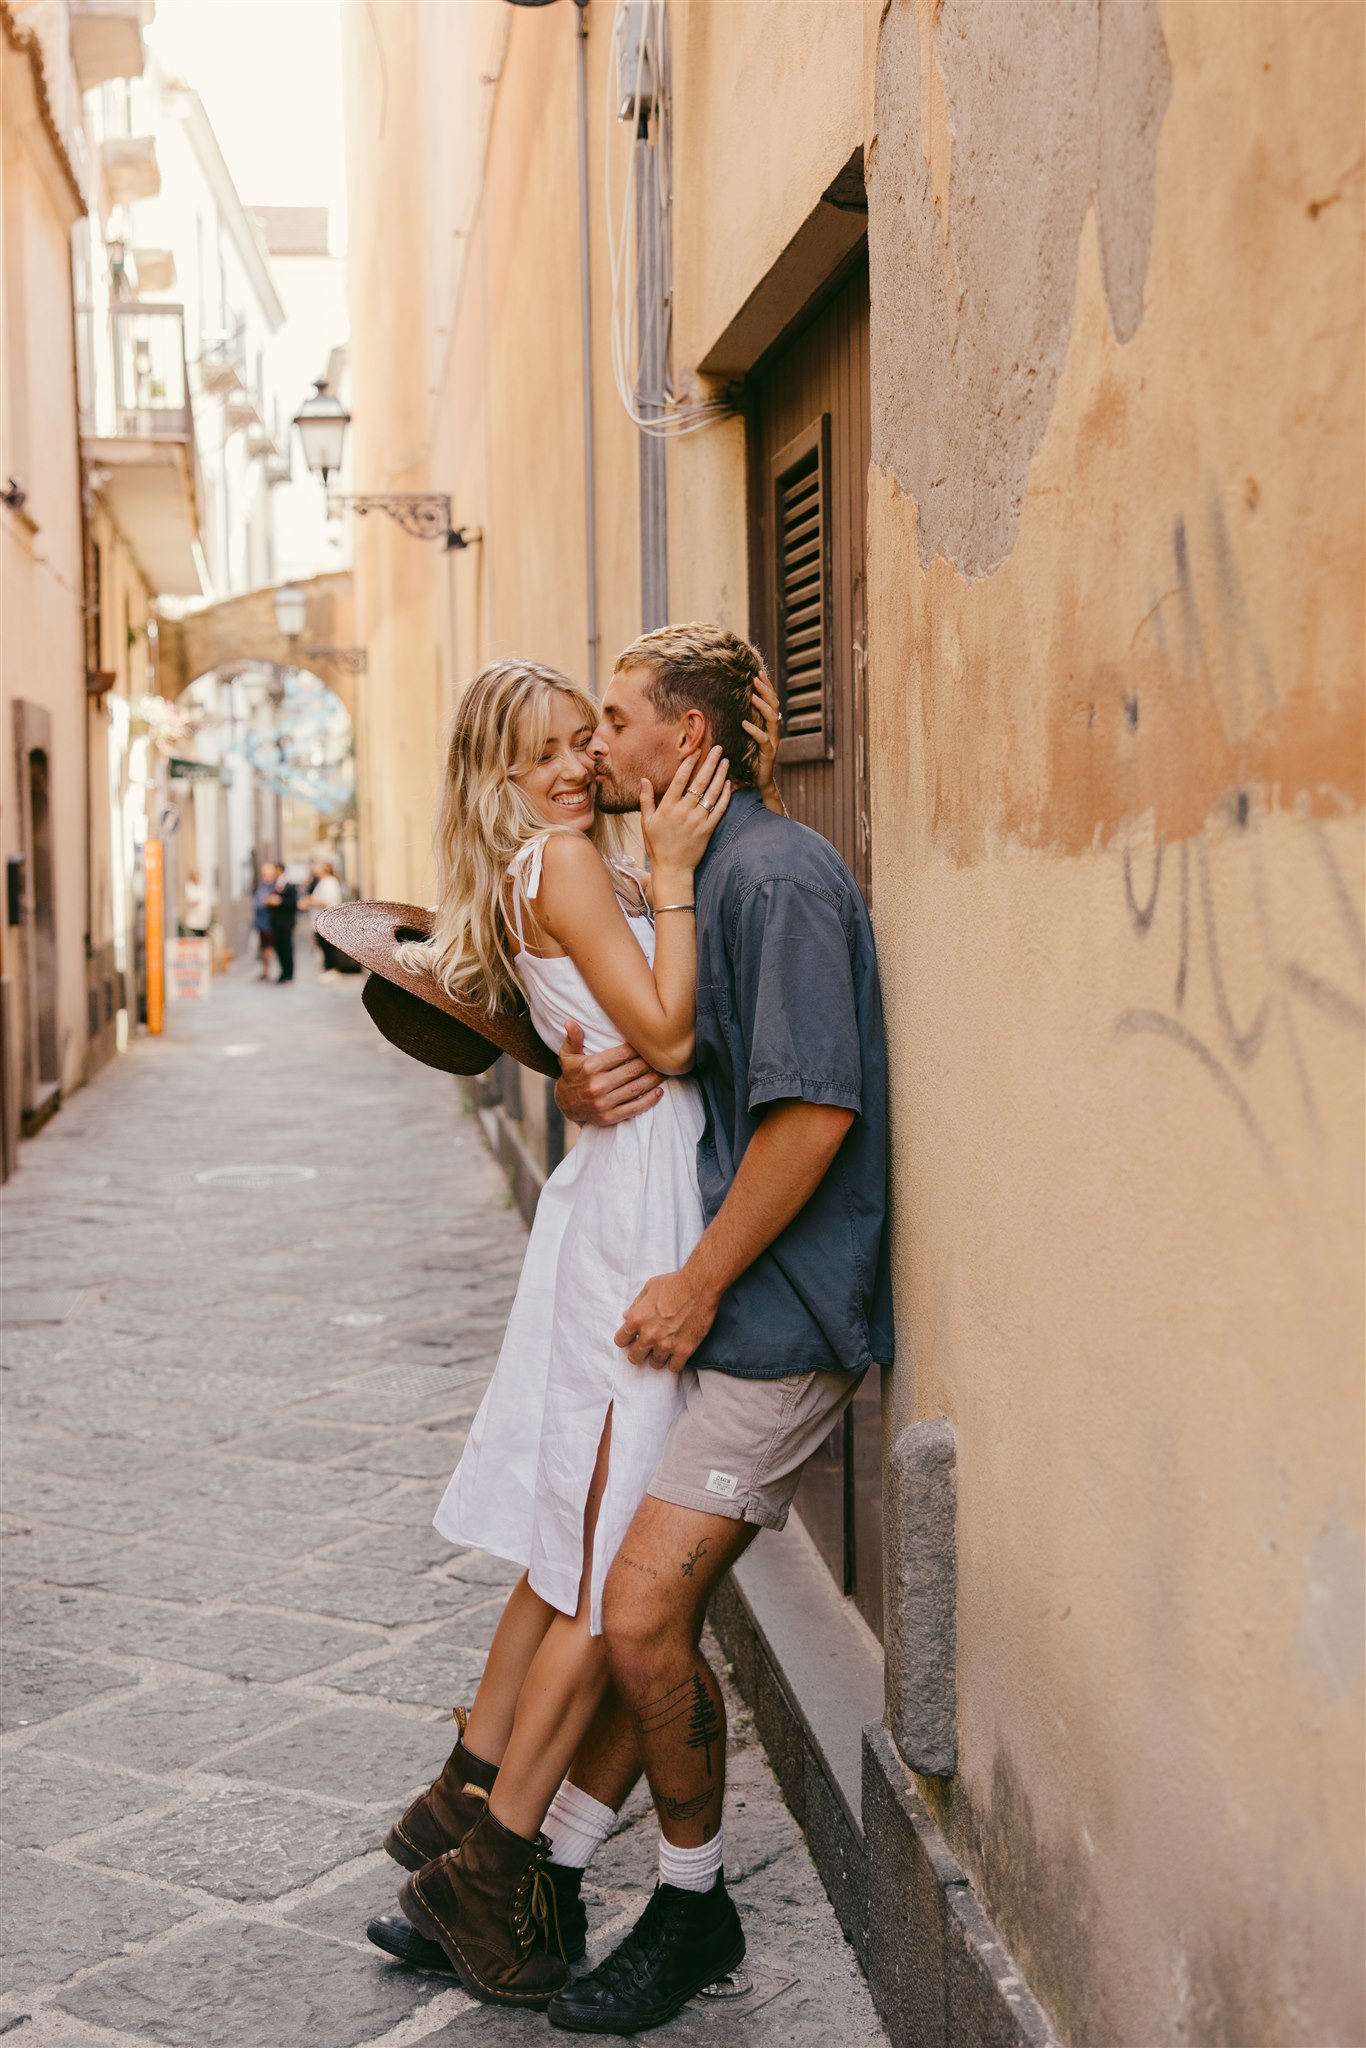 A Guide to Planning A Seamless Destination Wedding in Italy